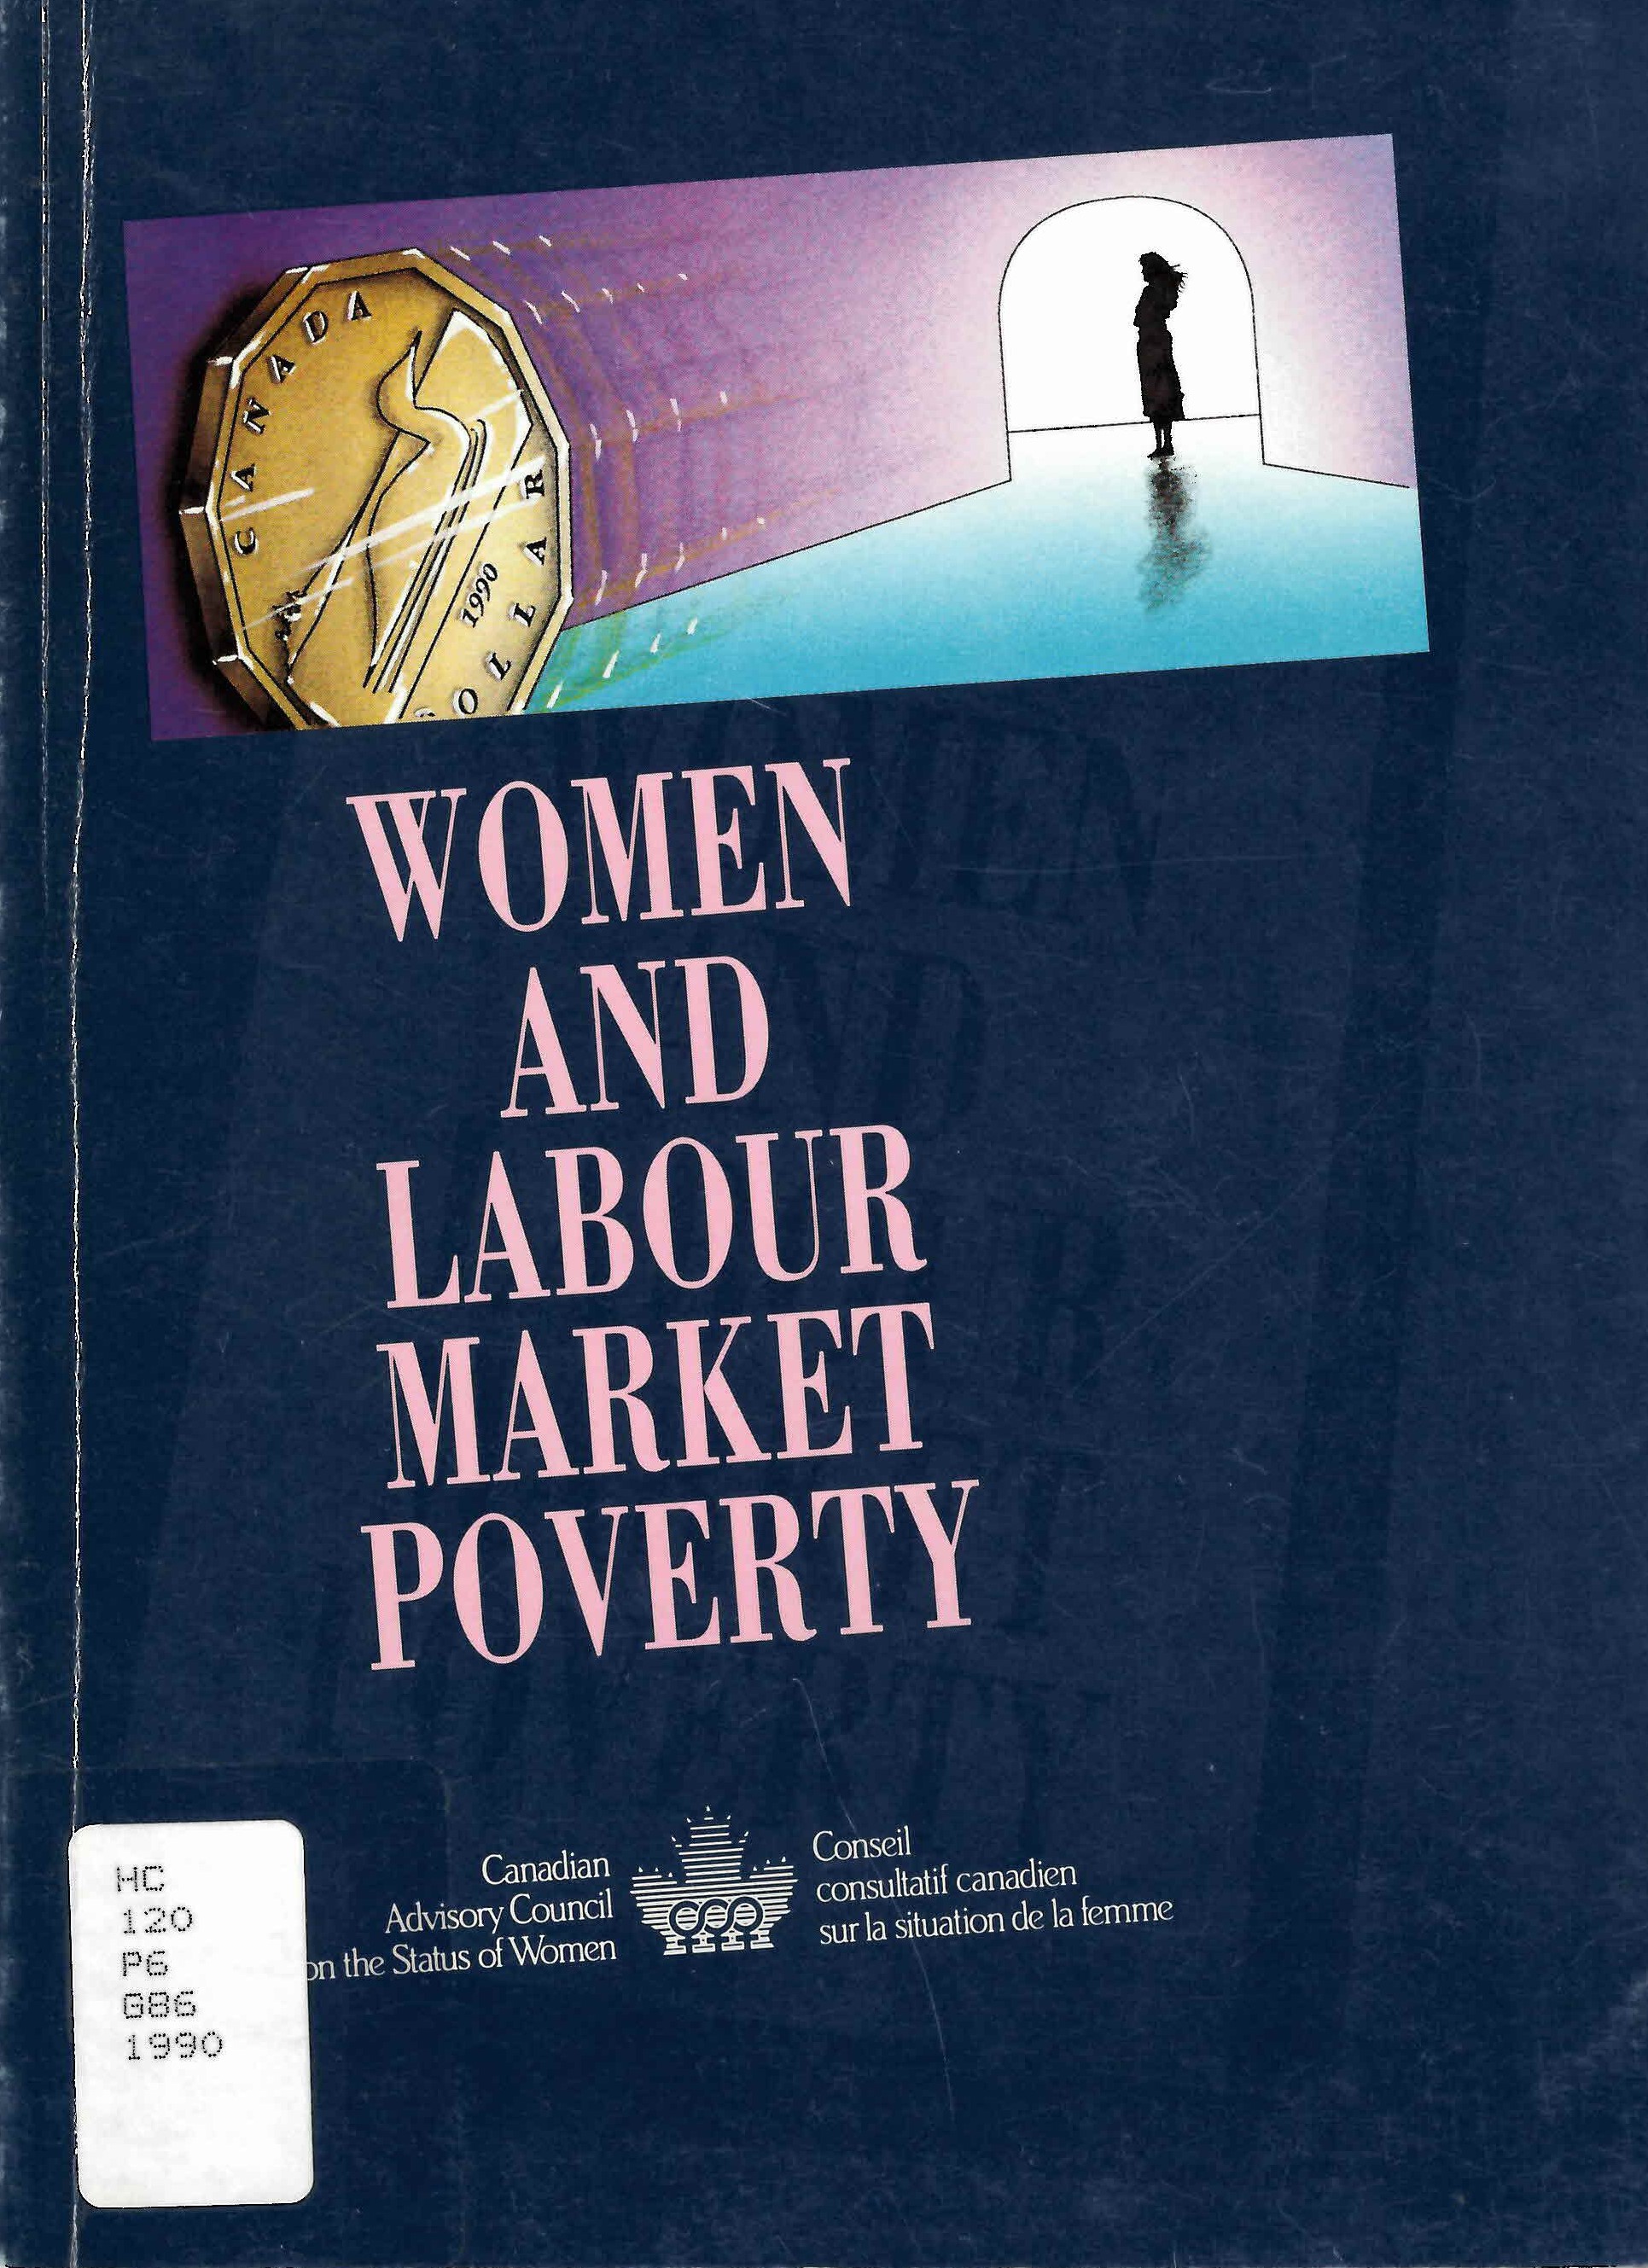 Women and labour market poverty